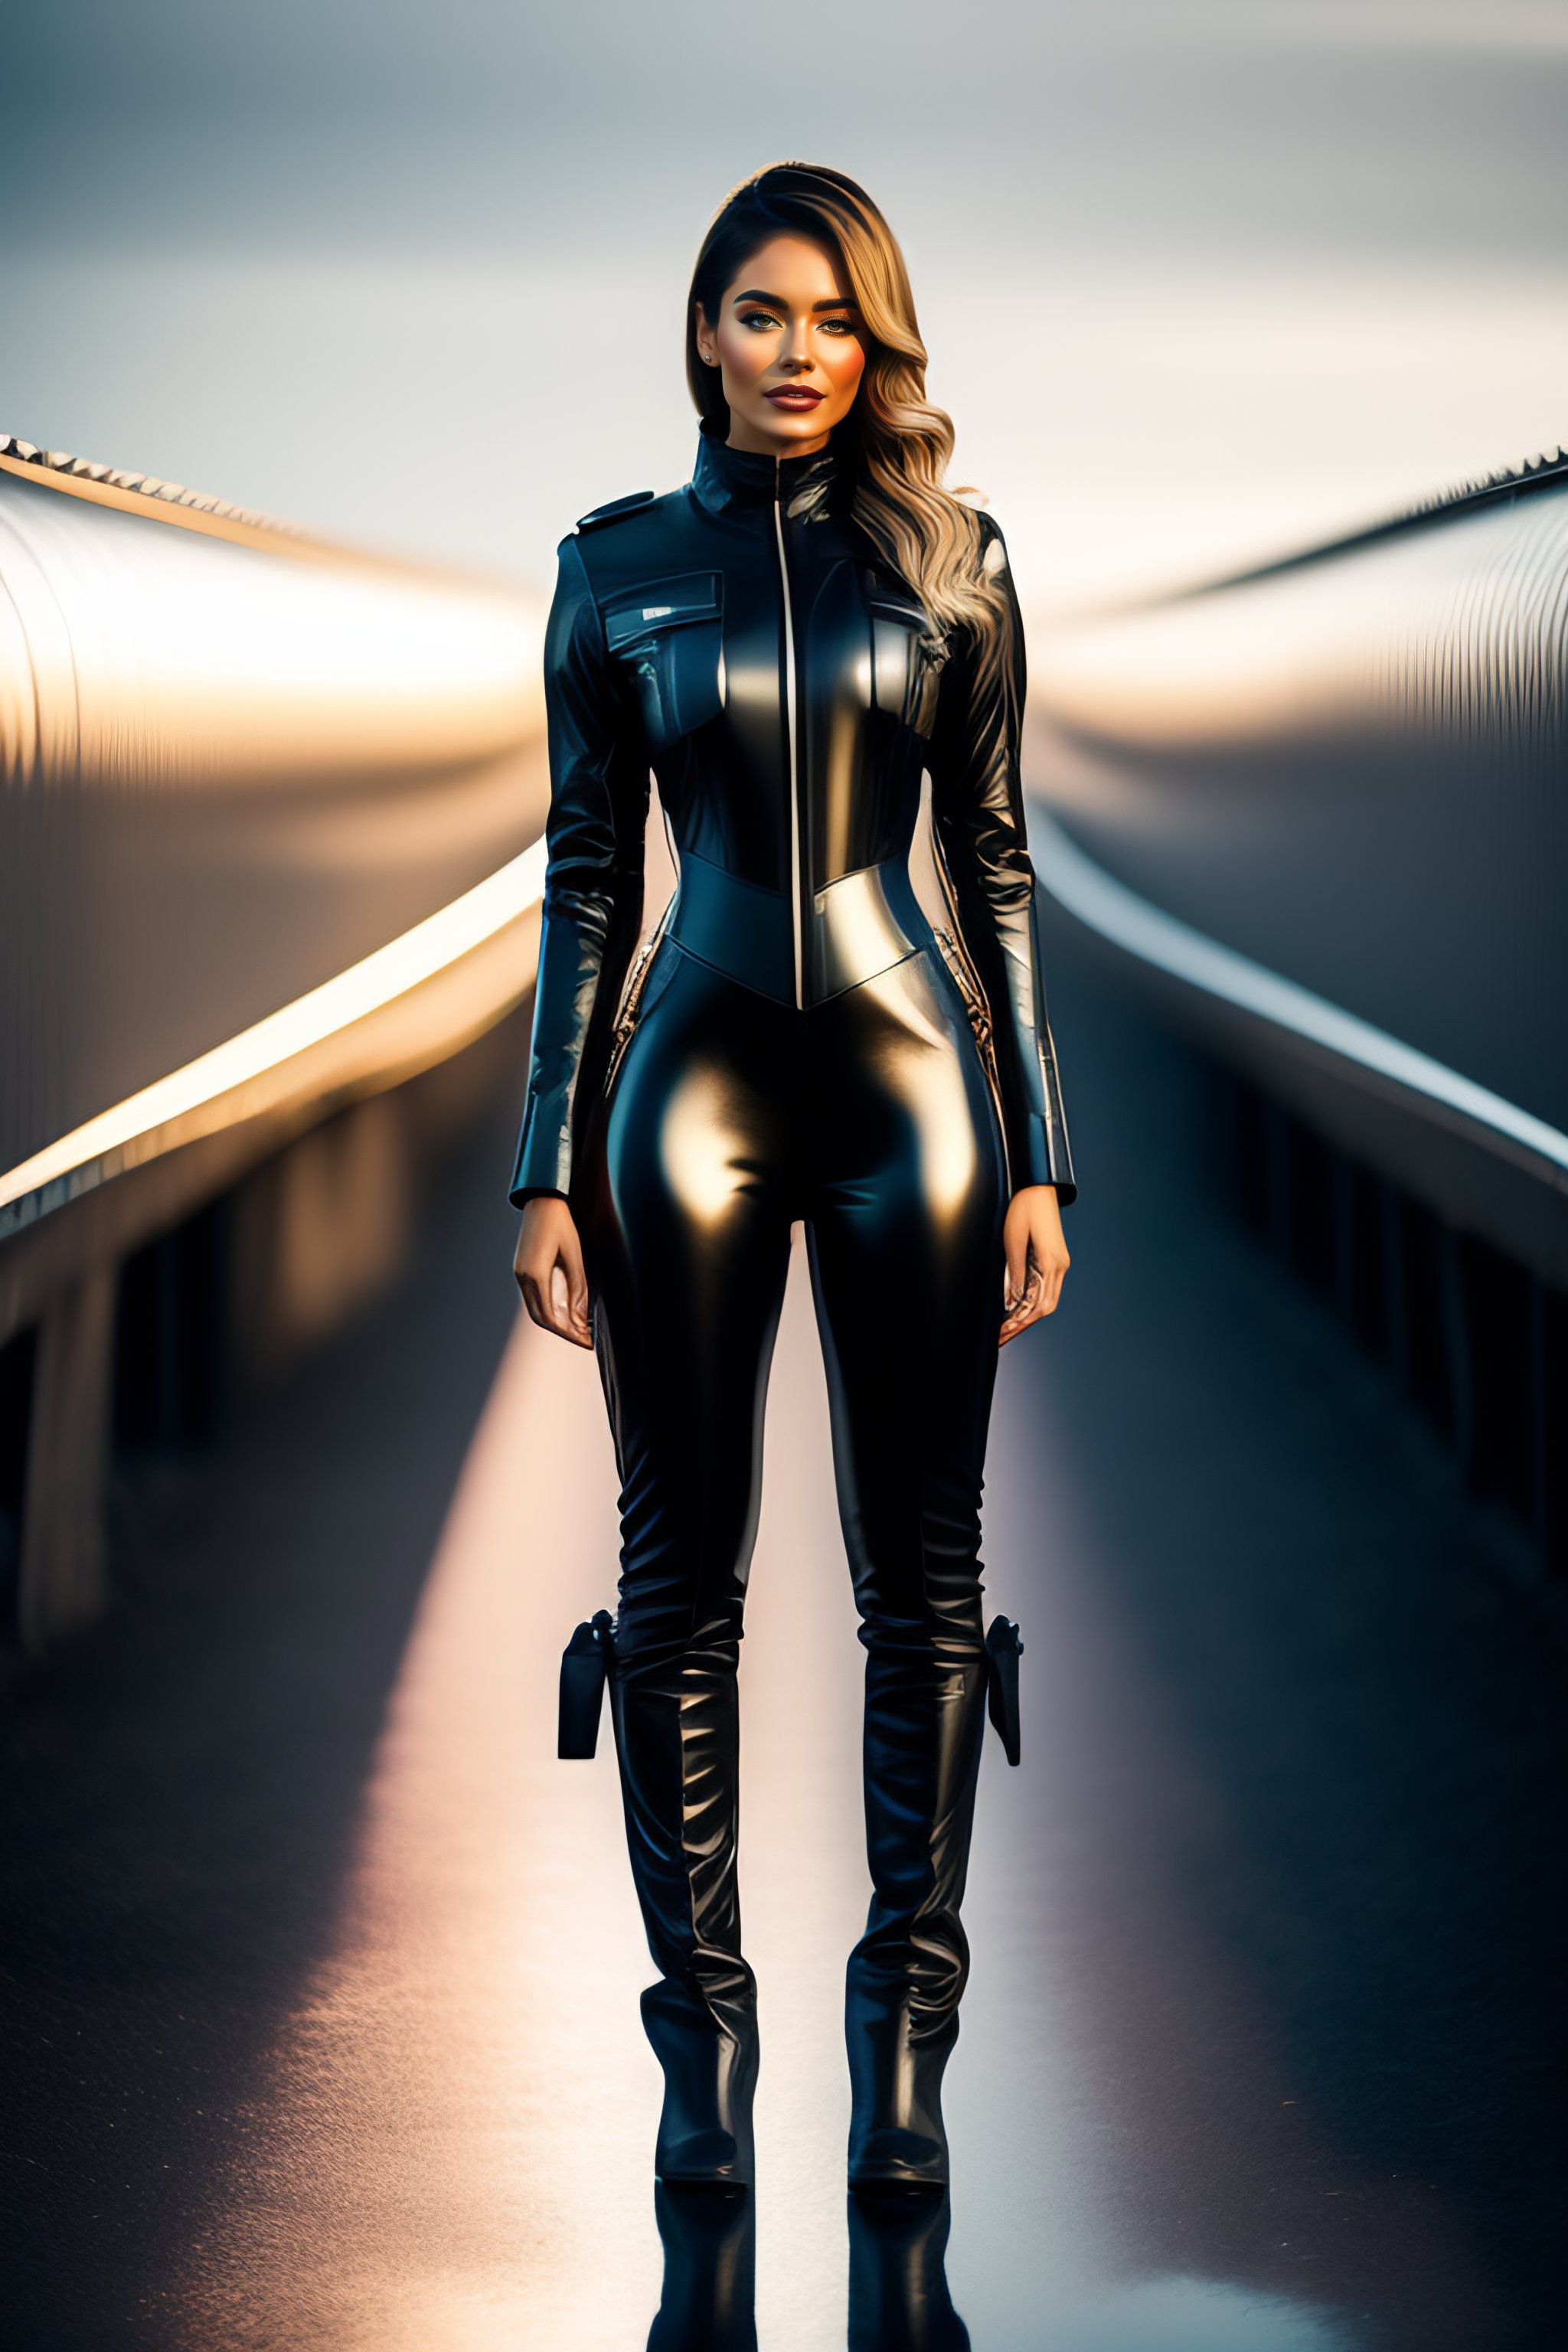 Lexica - Girl in shiny leather suit and boots